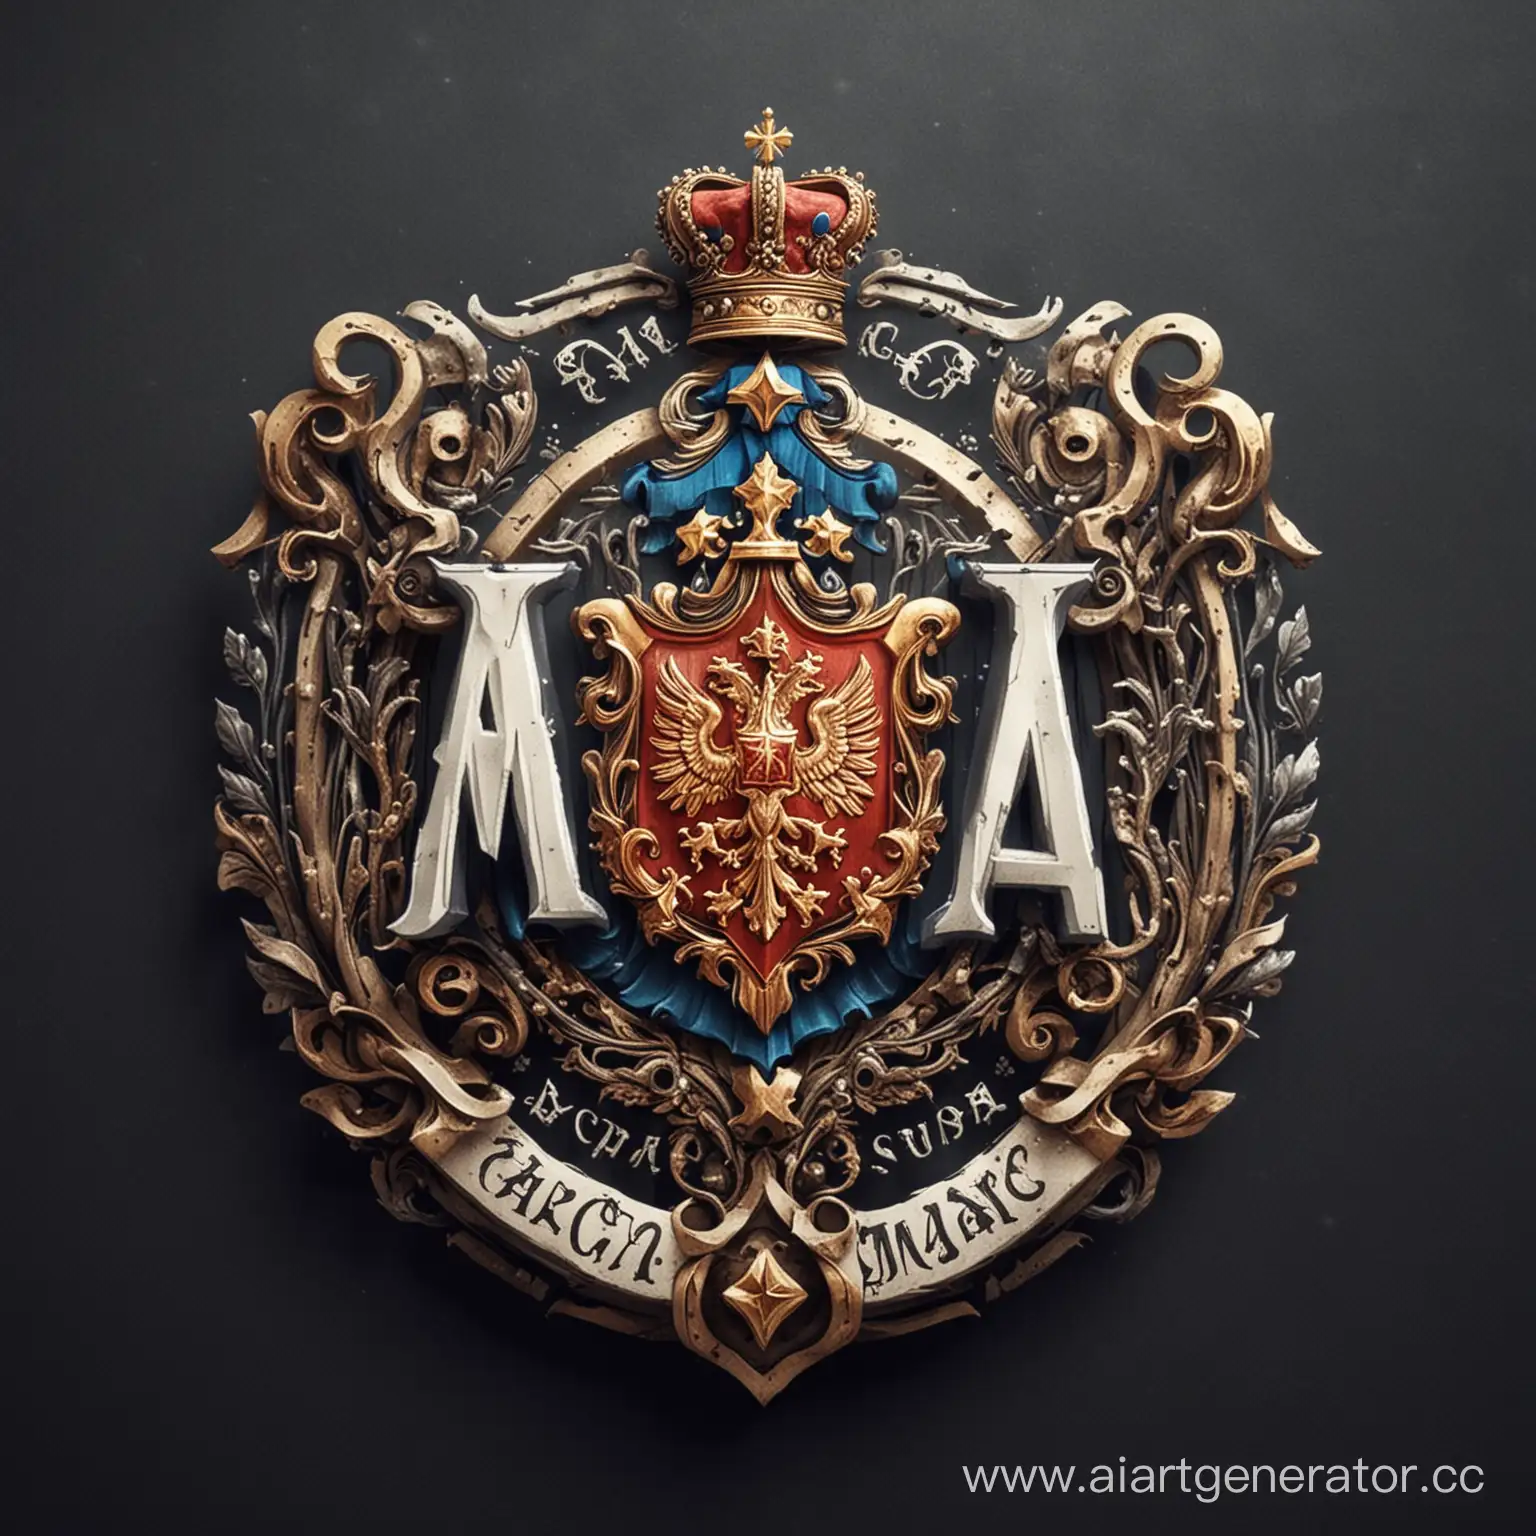 Union-of-Magicians-of-Russia-Logo-Mystical-Coat-of-Arms-with-Magical-Attributes